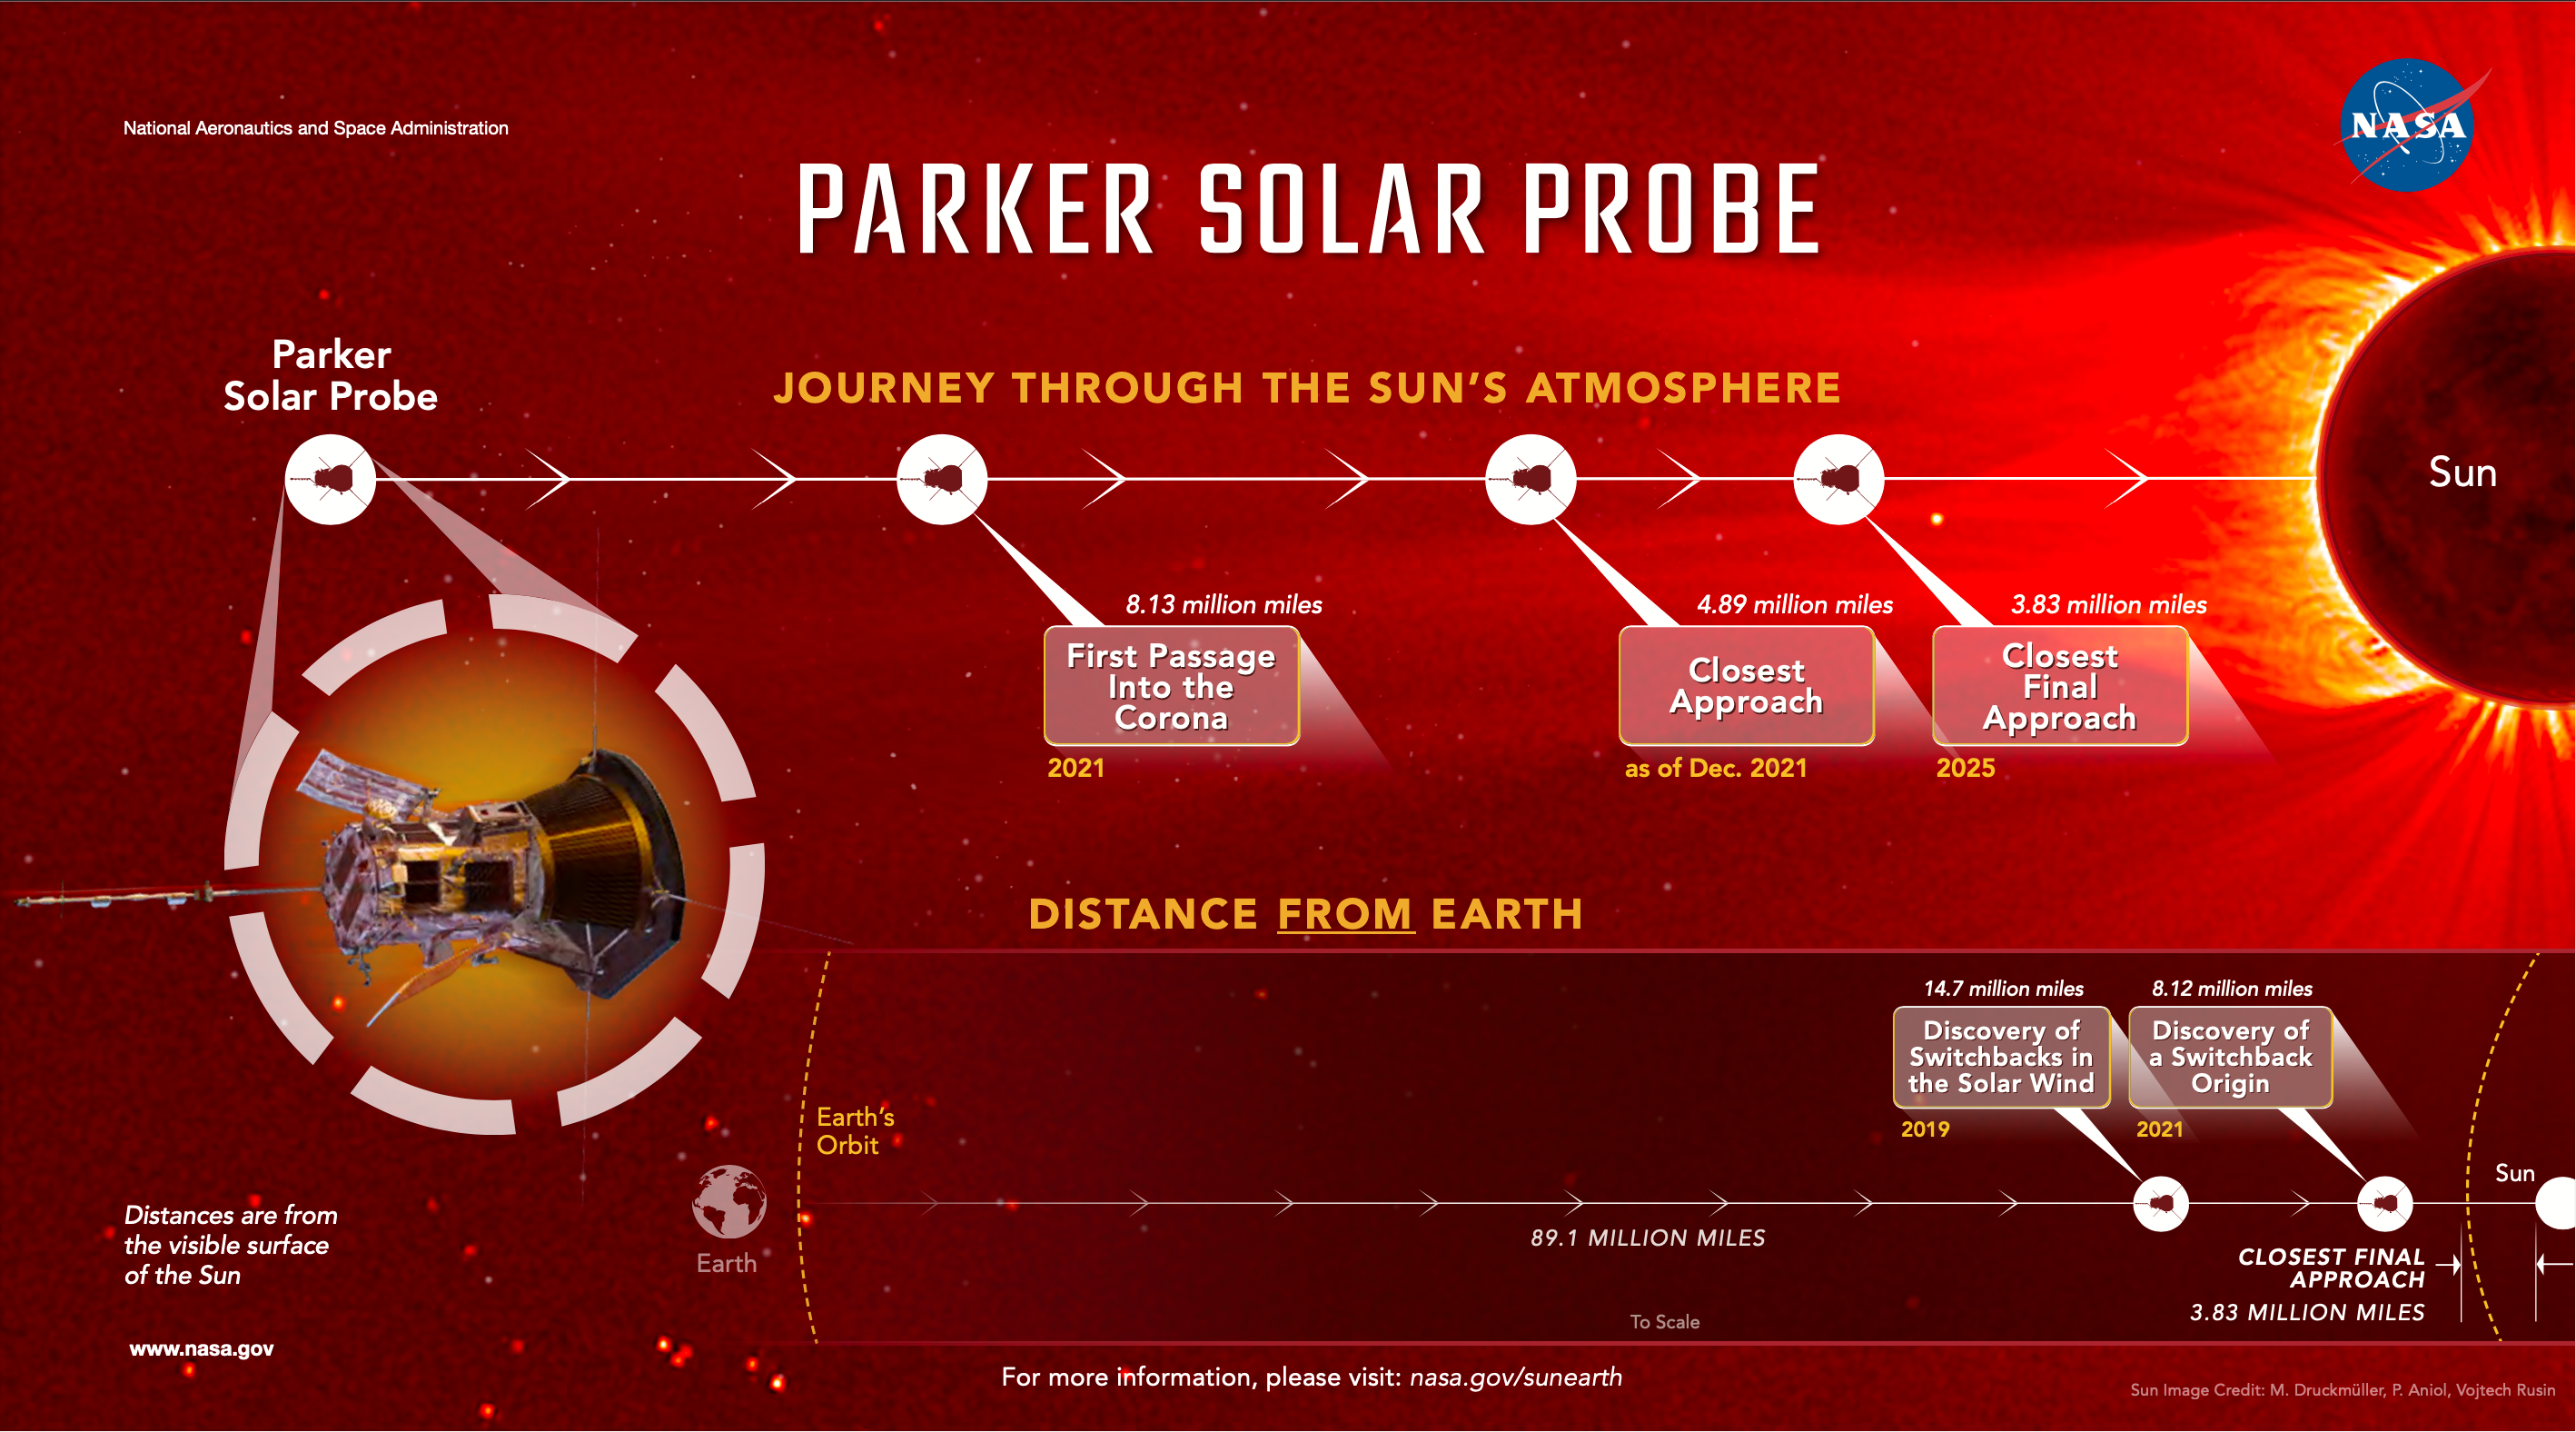 A look at where the Parker Solar Probe is headed next.